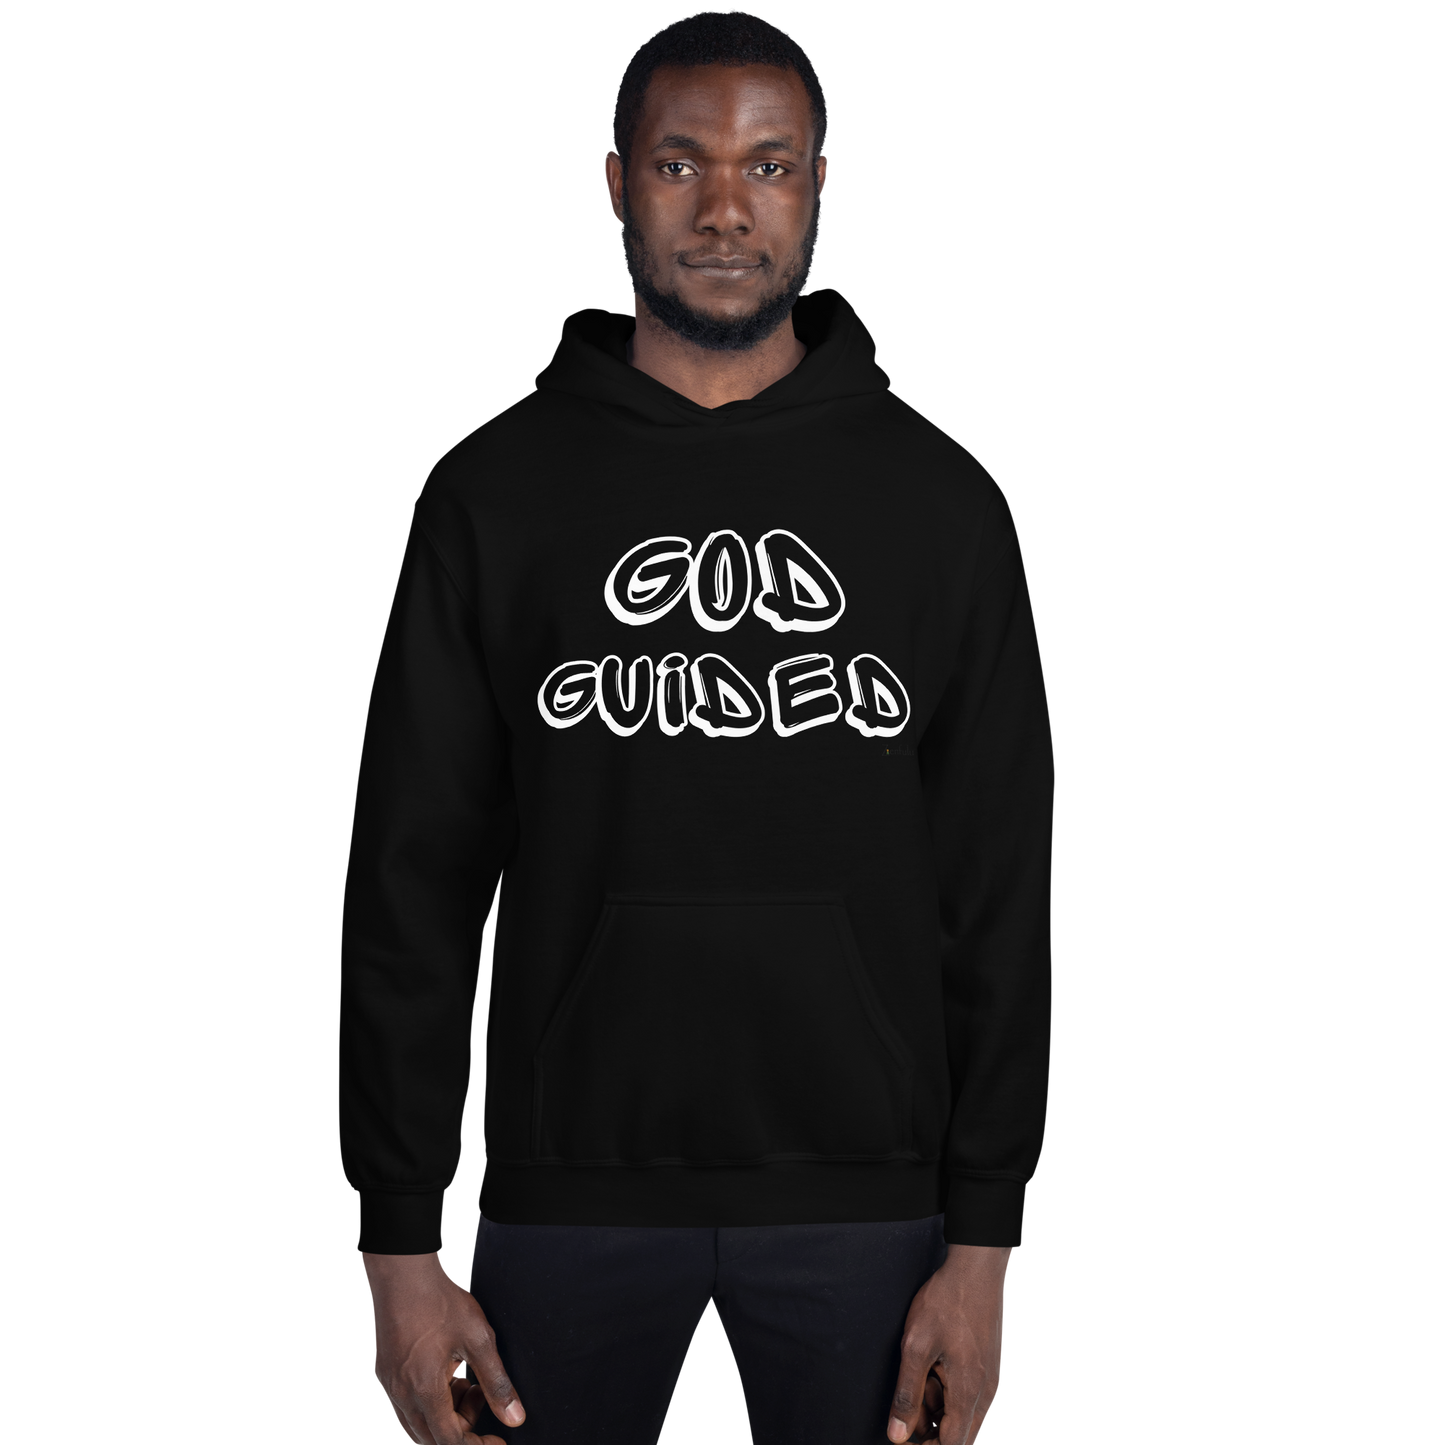 God Guided - Unisex Hoodie